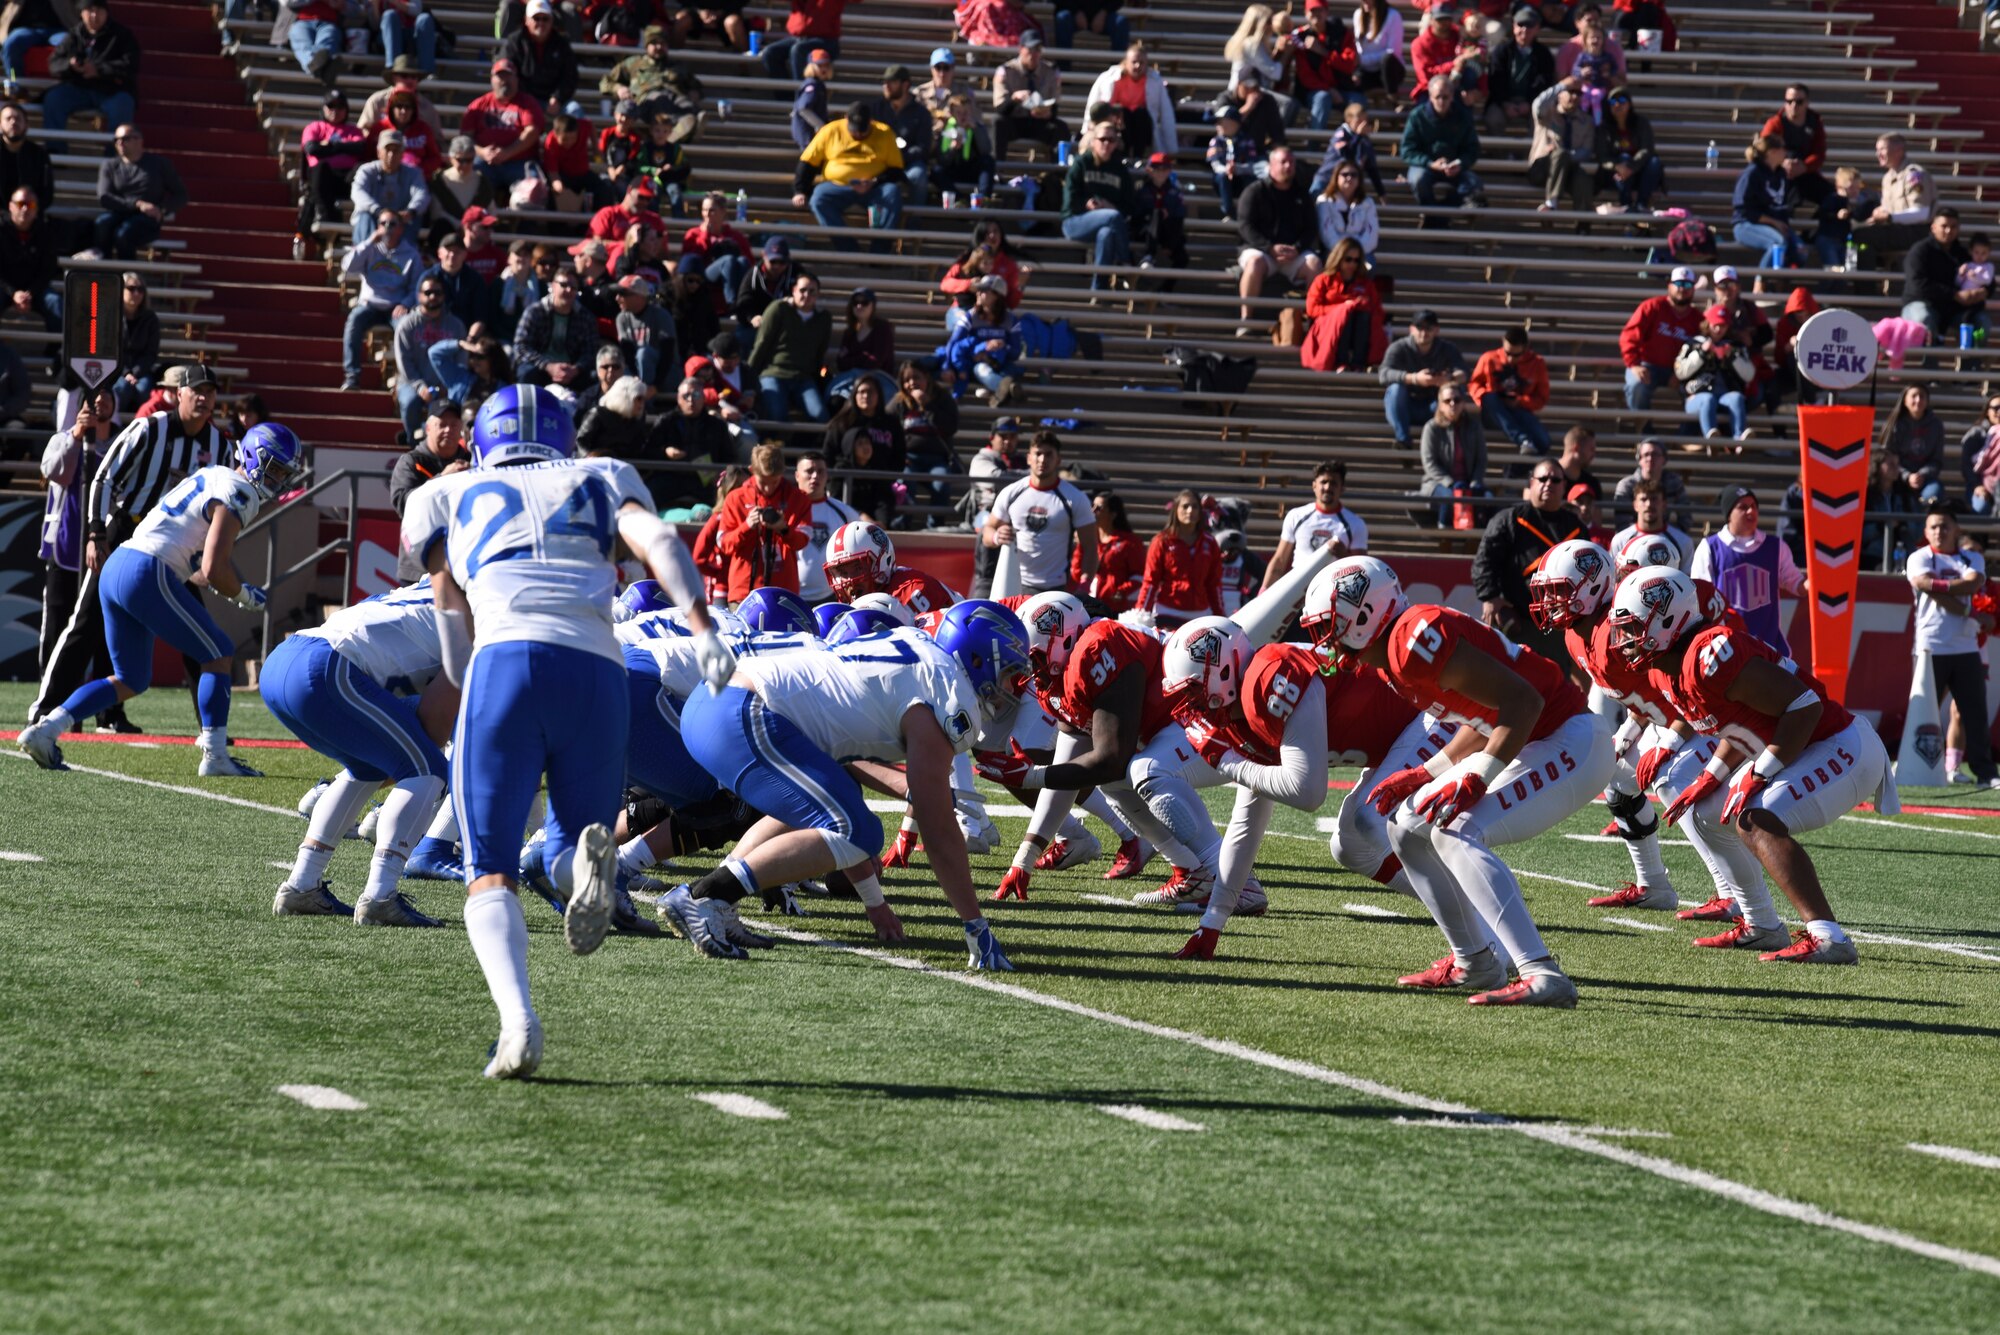 Photo of football game